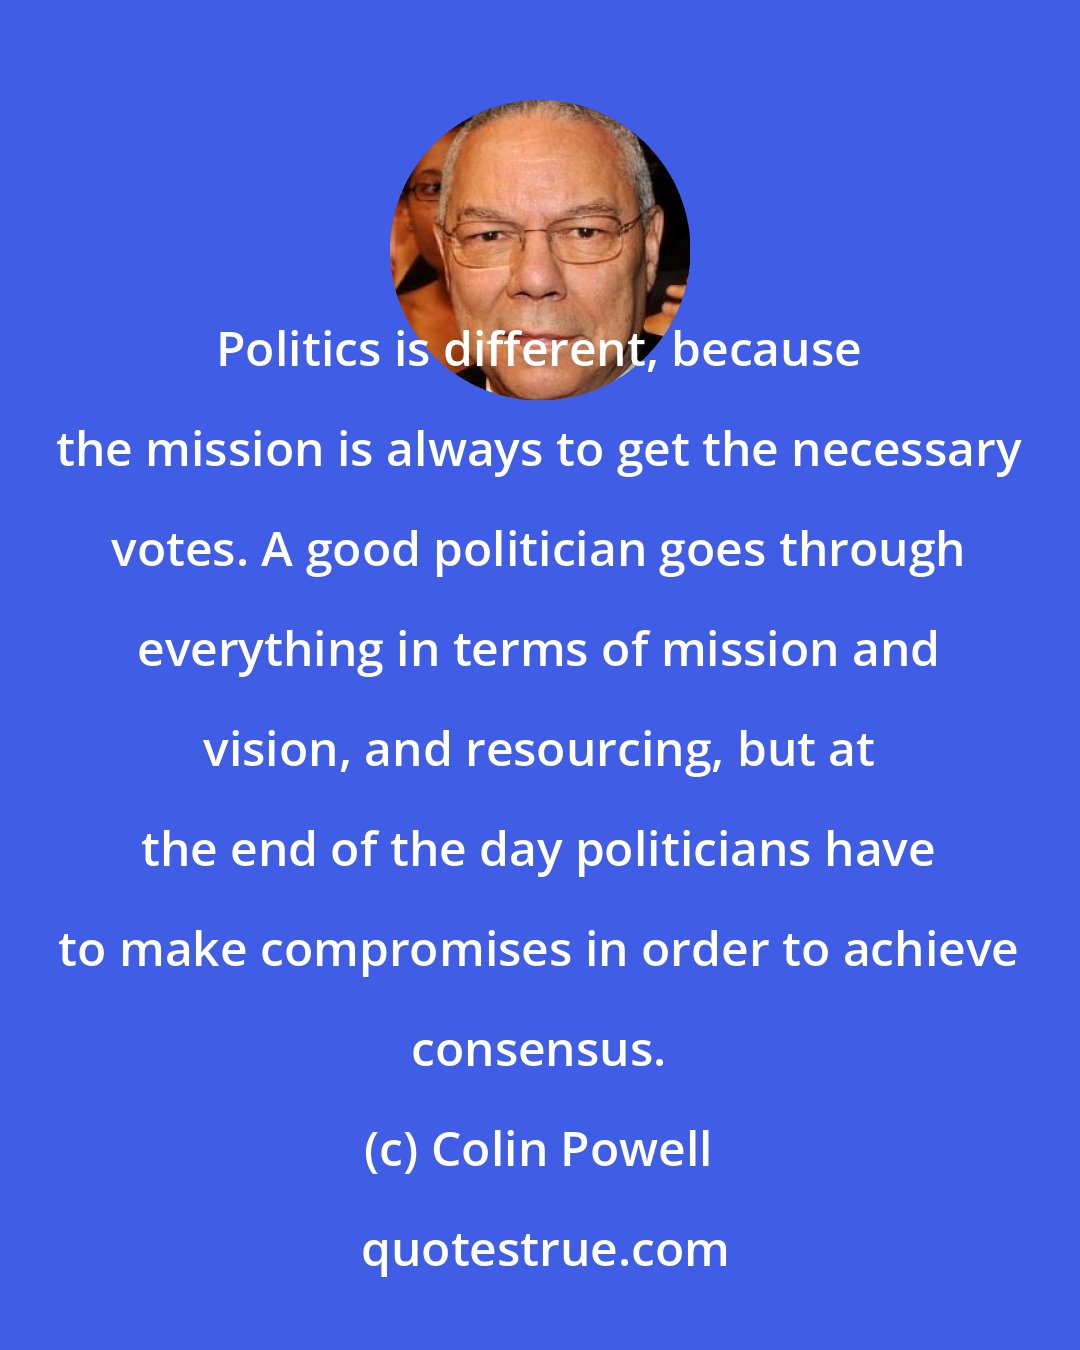 Colin Powell: Politics is different, because the mission is always to get the necessary votes. A good politician goes through everything in terms of mission and vision, and resourcing, but at the end of the day politicians have to make compromises in order to achieve consensus.